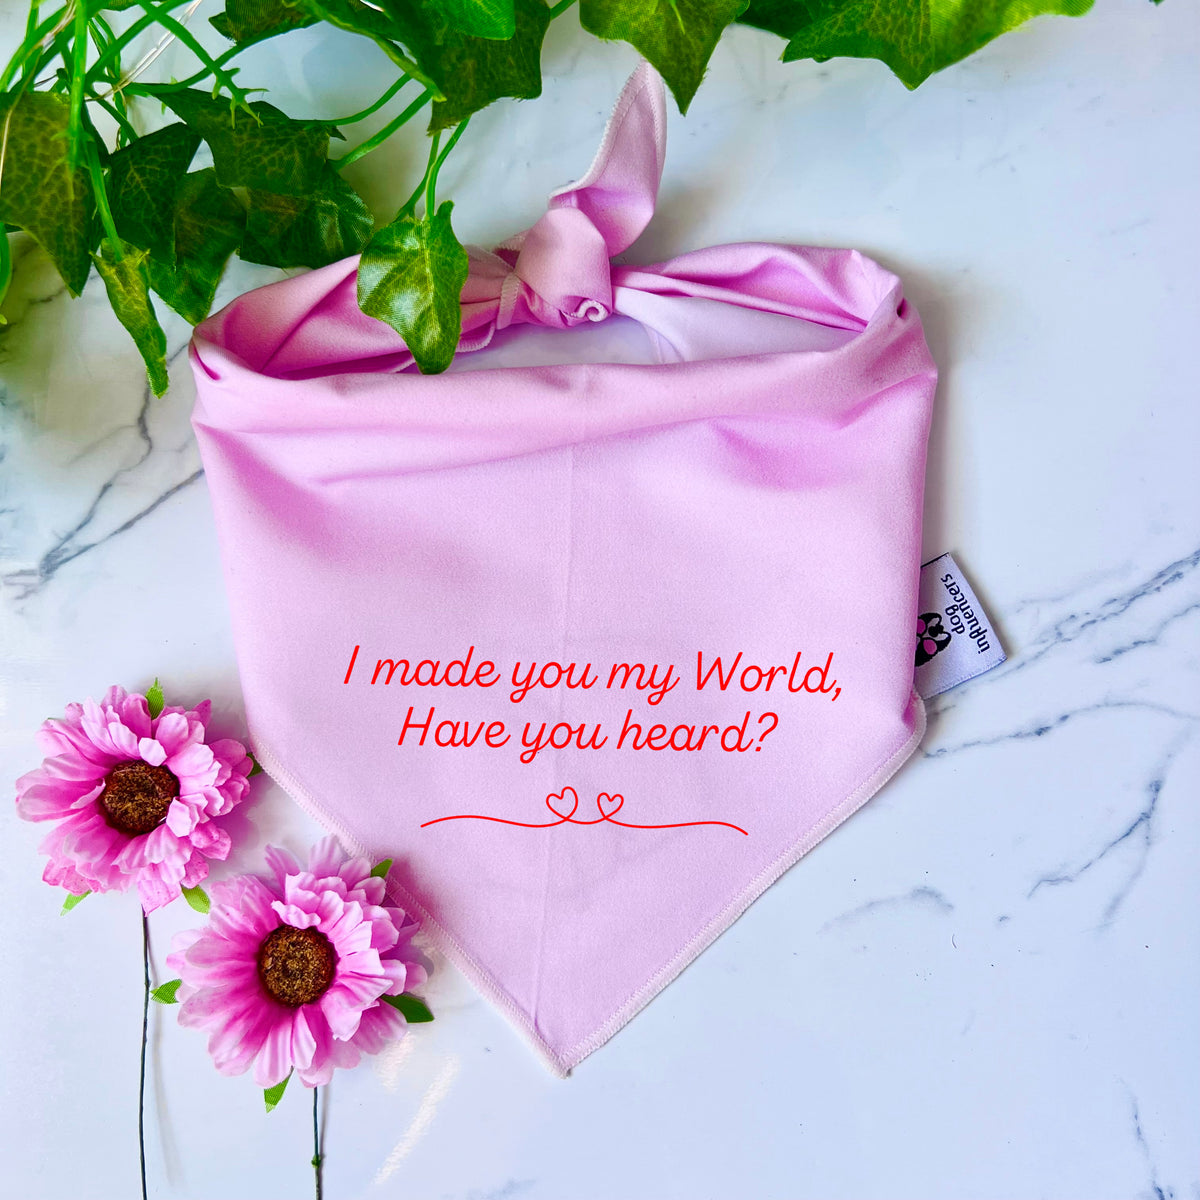 Taylor Swift Dog Bandana - "I made you my world have you heard?" - Inspired by the song "Bejeweled" - Gift for a fan Dog Mum